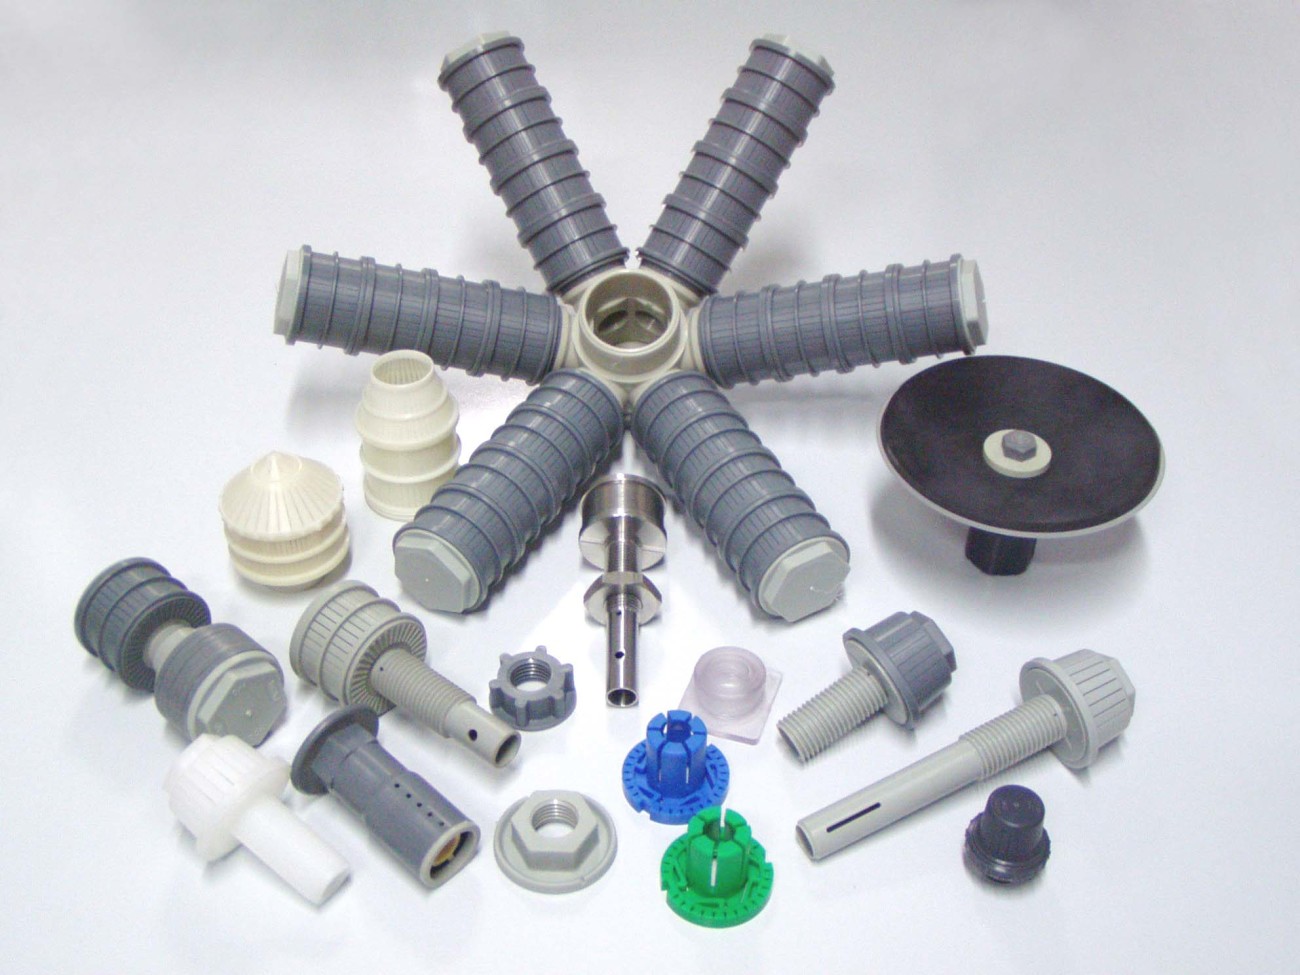 Filter nozzles in thermoplastic material for water treatment.